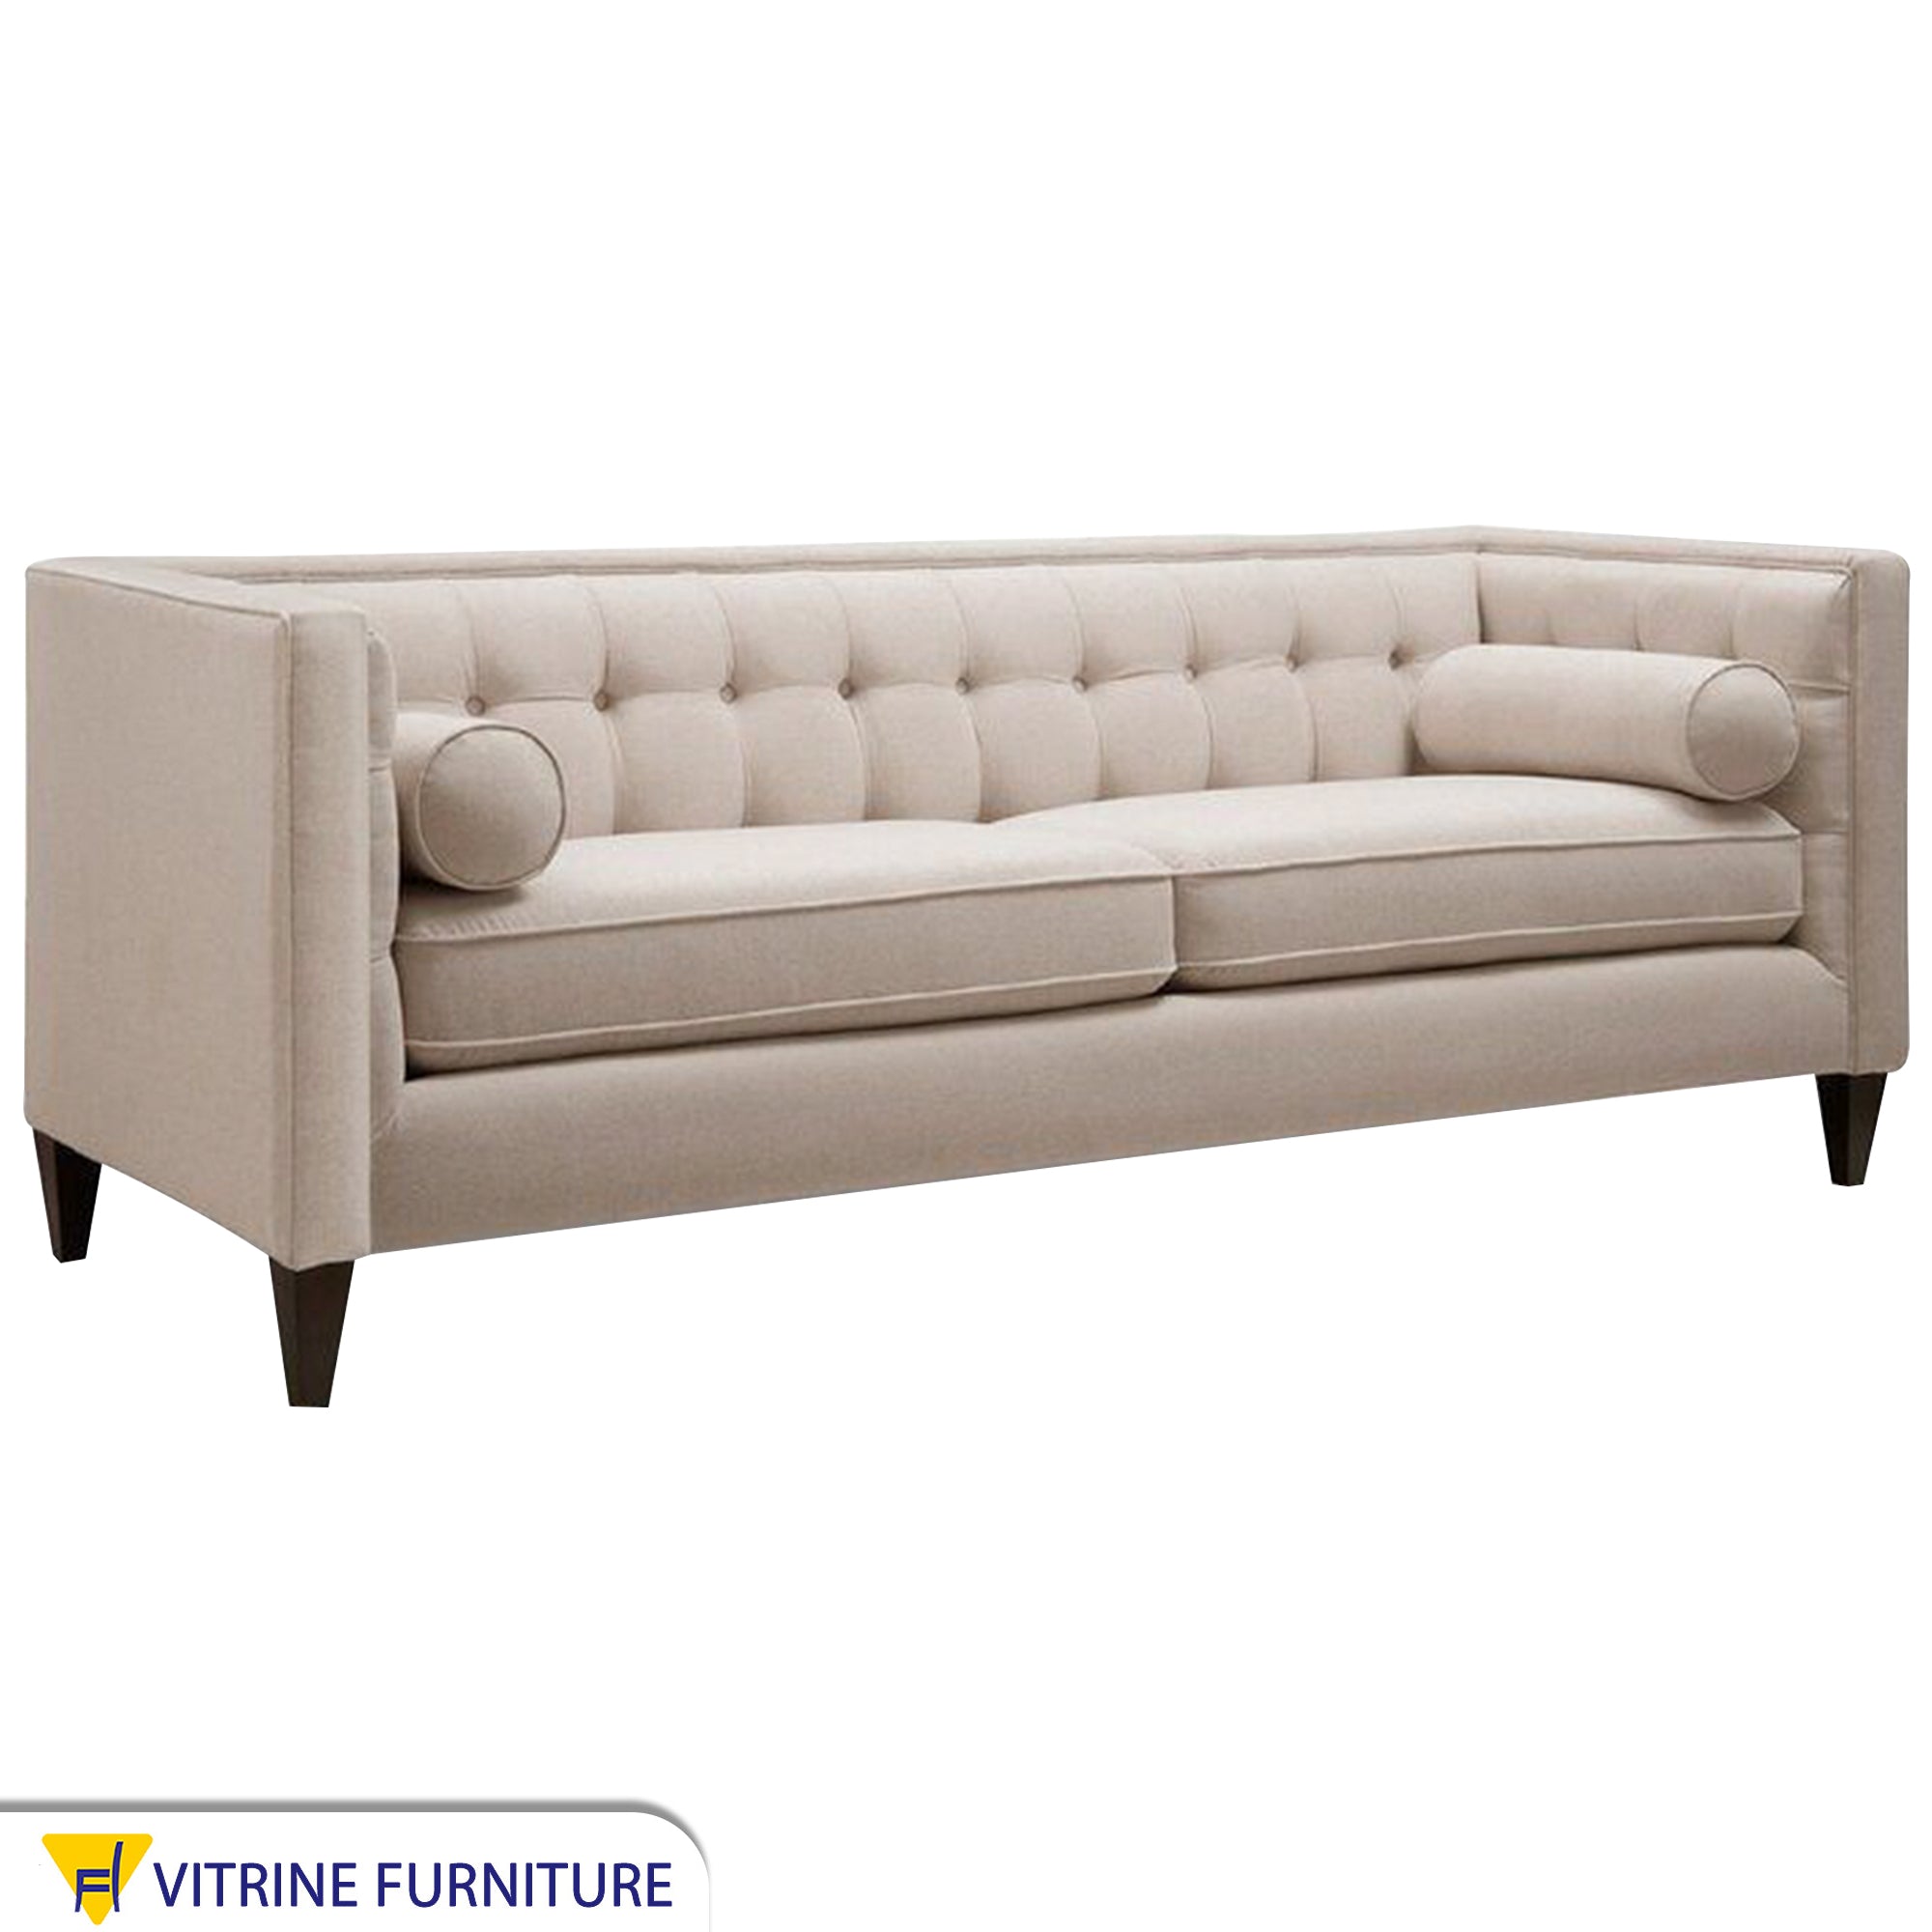 Beige sofa with capotonite beads in the back